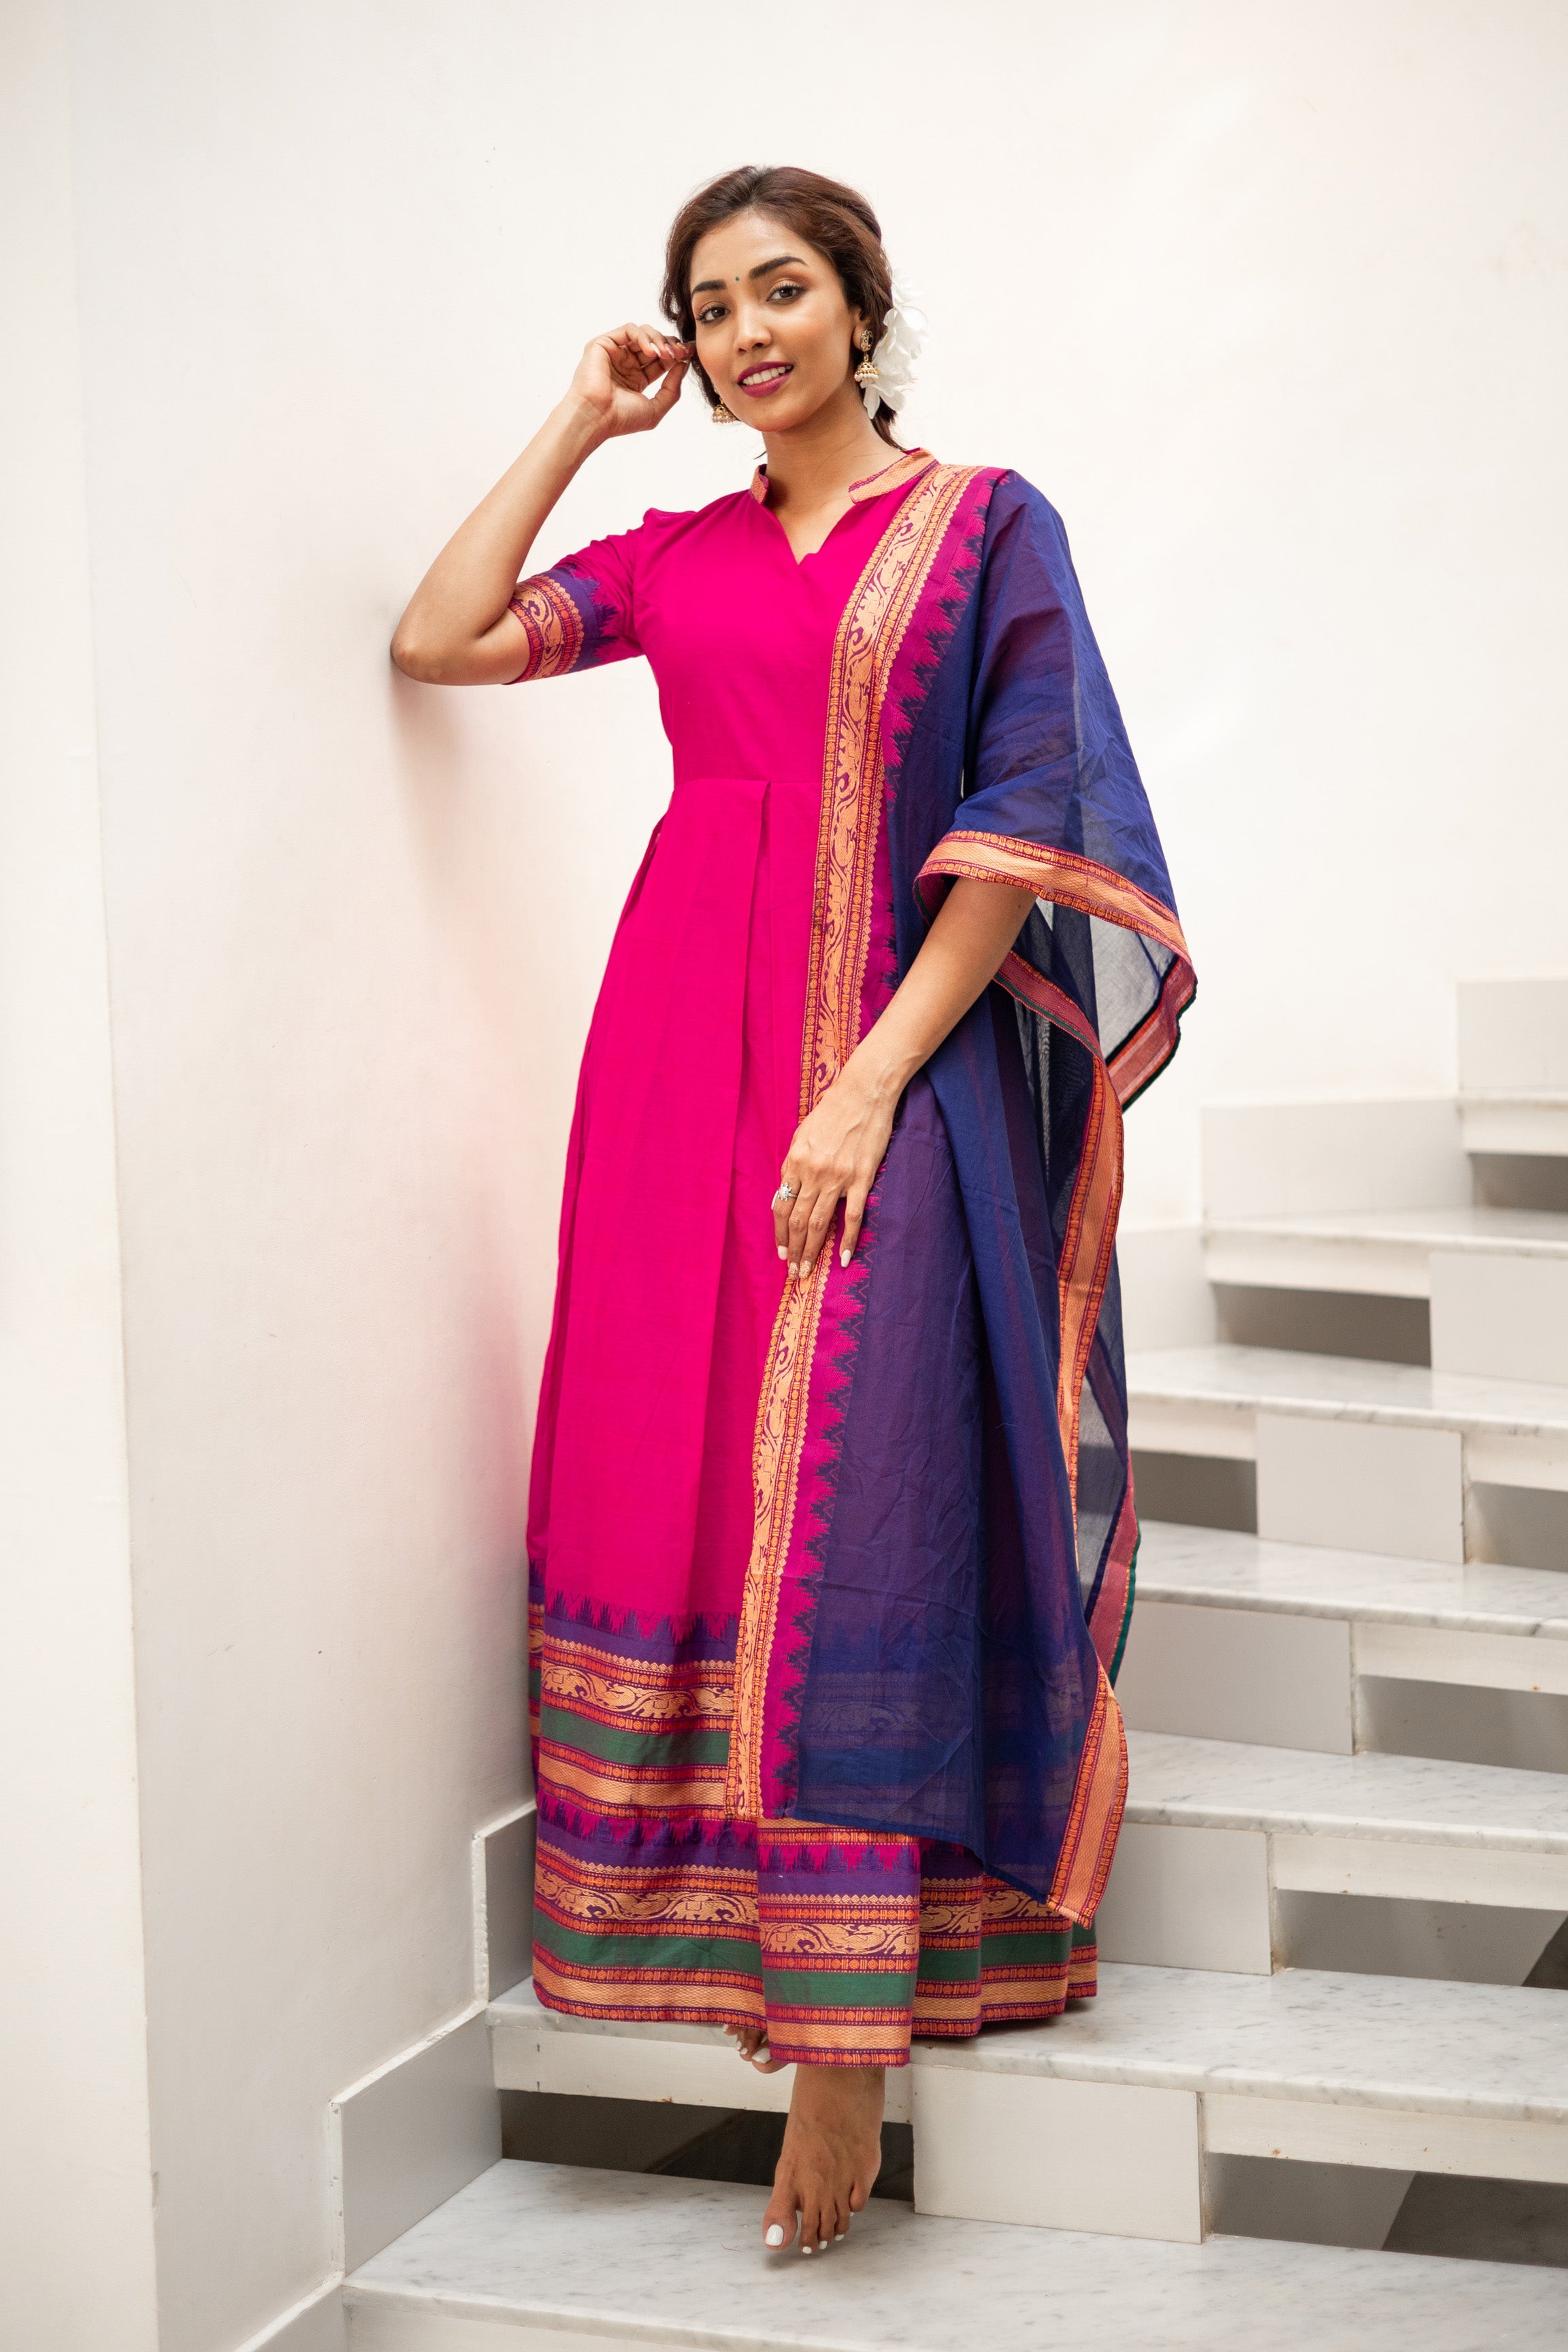 Stand out in this traditional hot pink maxi dress with dupatta. Crafted from pure cotton, this birthday maxi is perfect for a day in the sun. Flared, loose and comfortable, this ladies' party wear dress will keep you stylish all summer long.